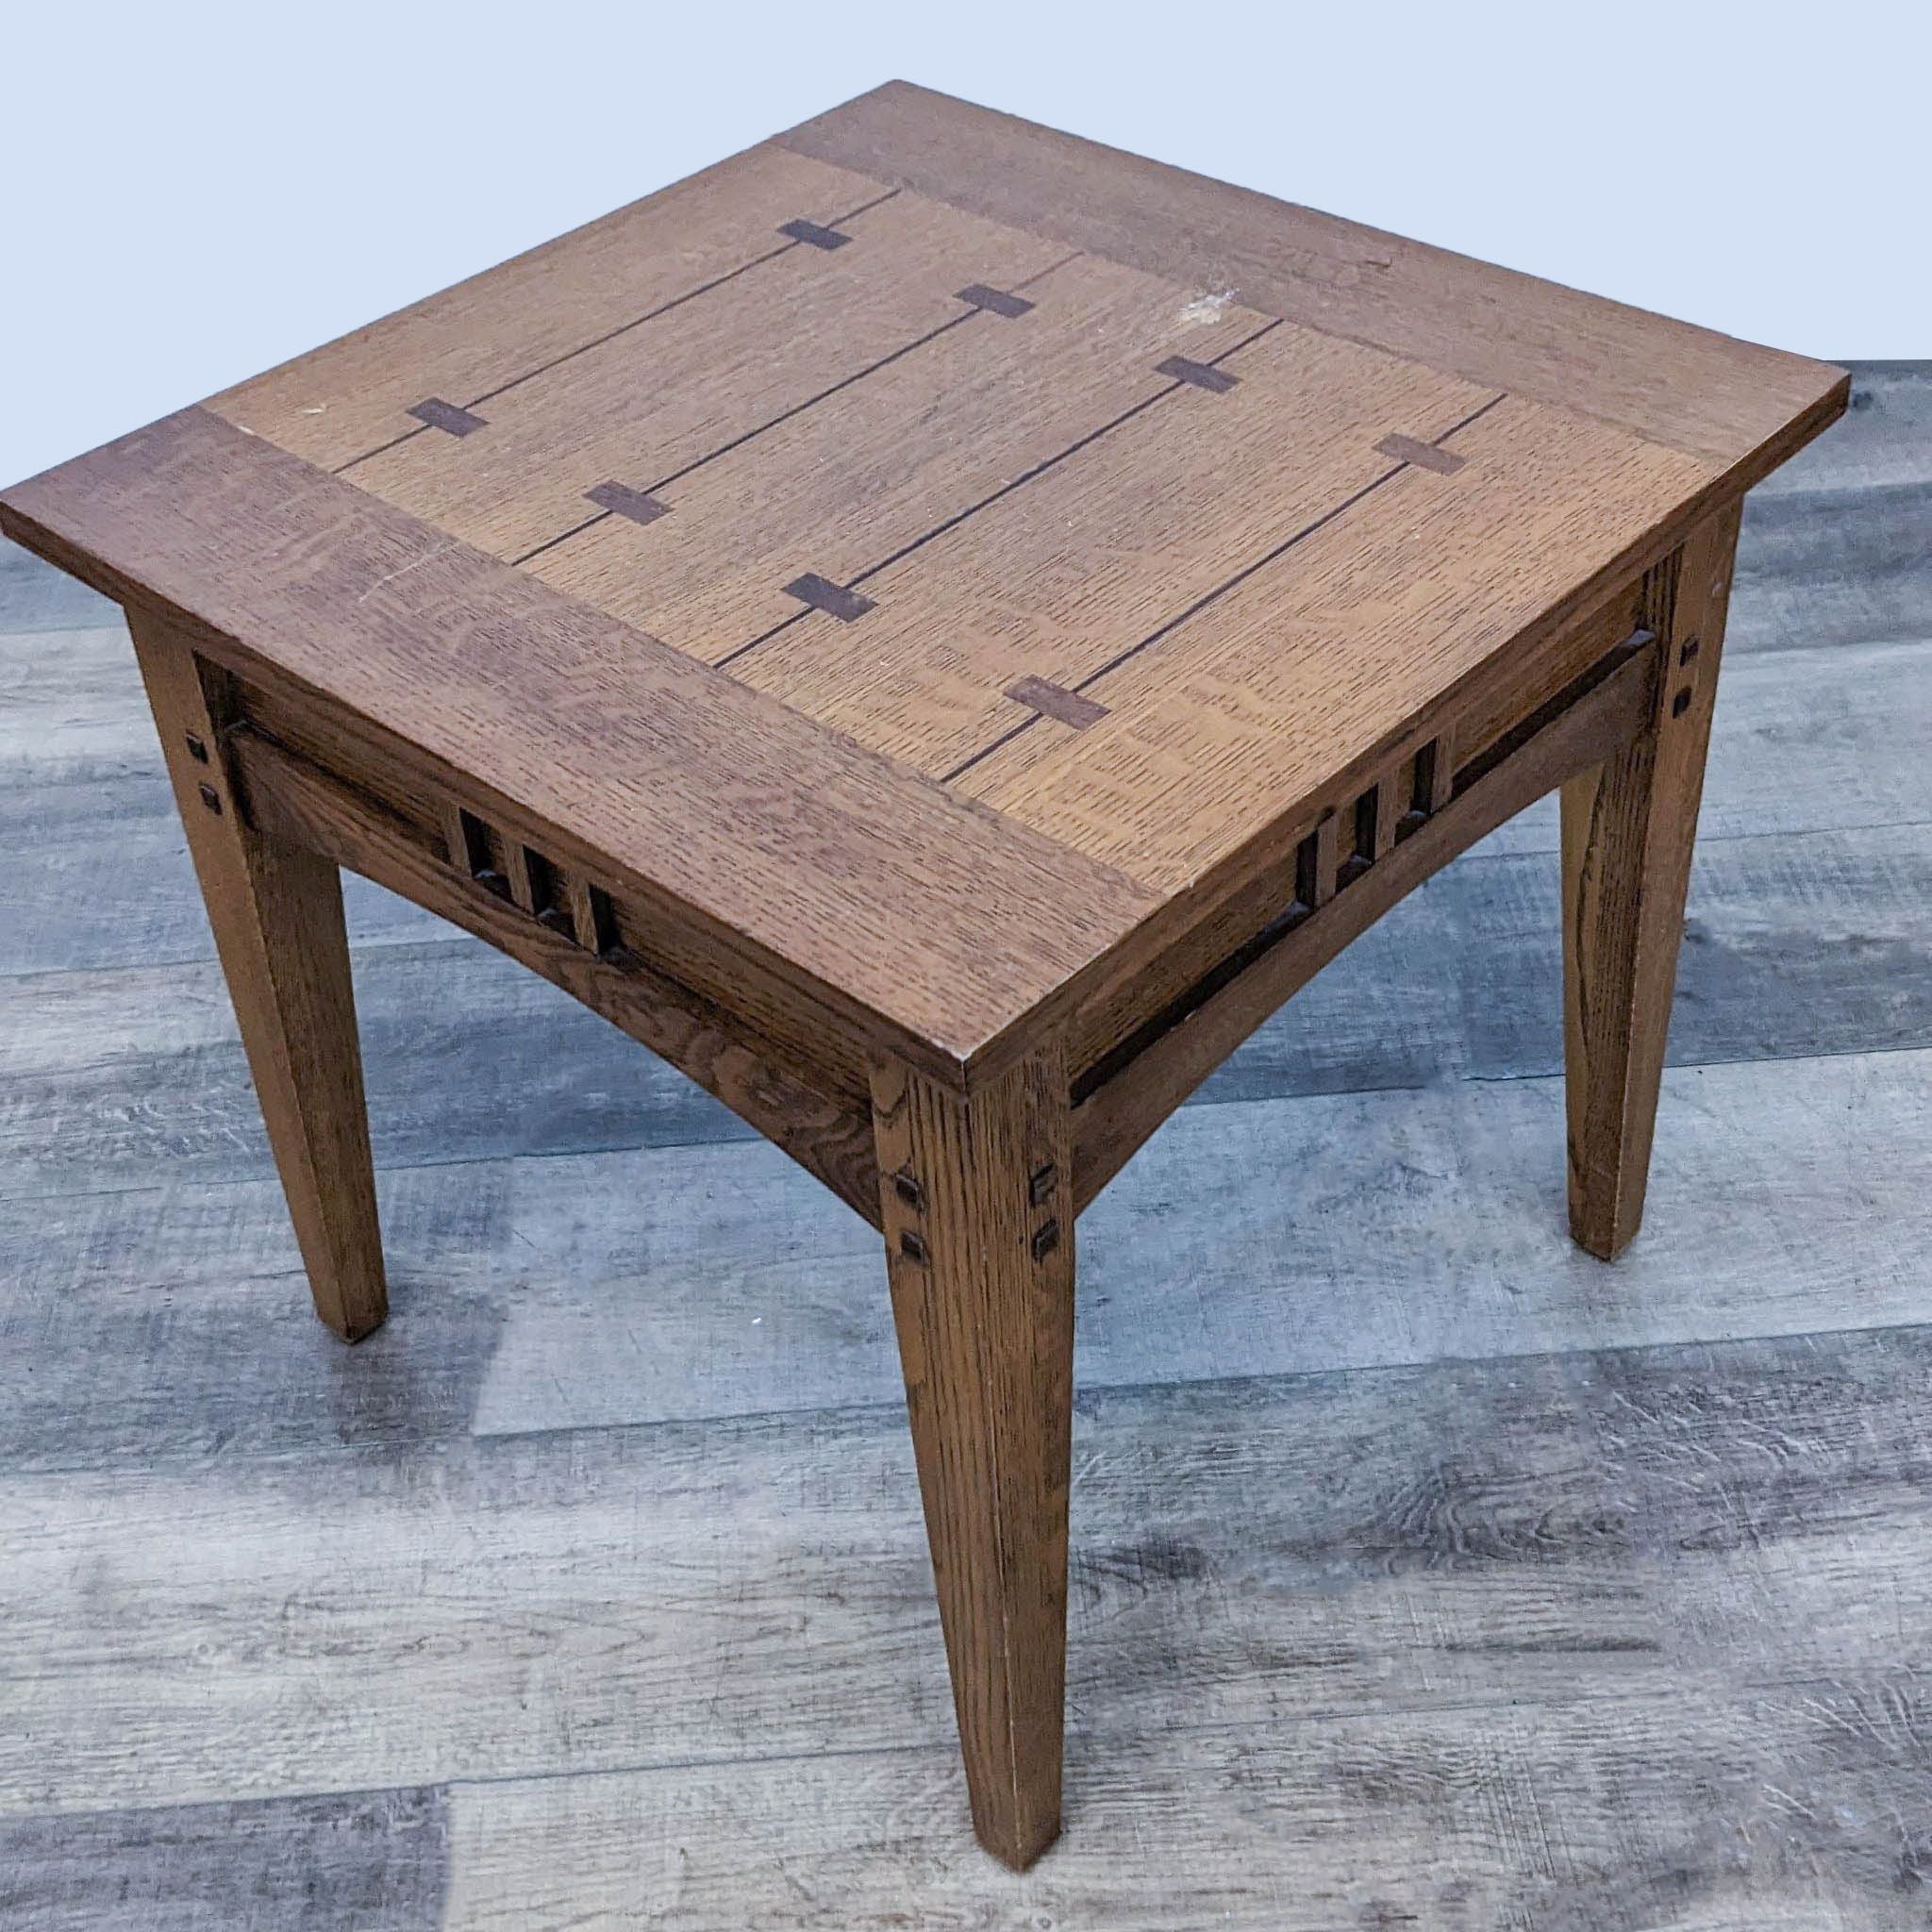 Reperch oak end table with decorative inlay on top and cut-out patterns on sides, on a grey wooden floor.